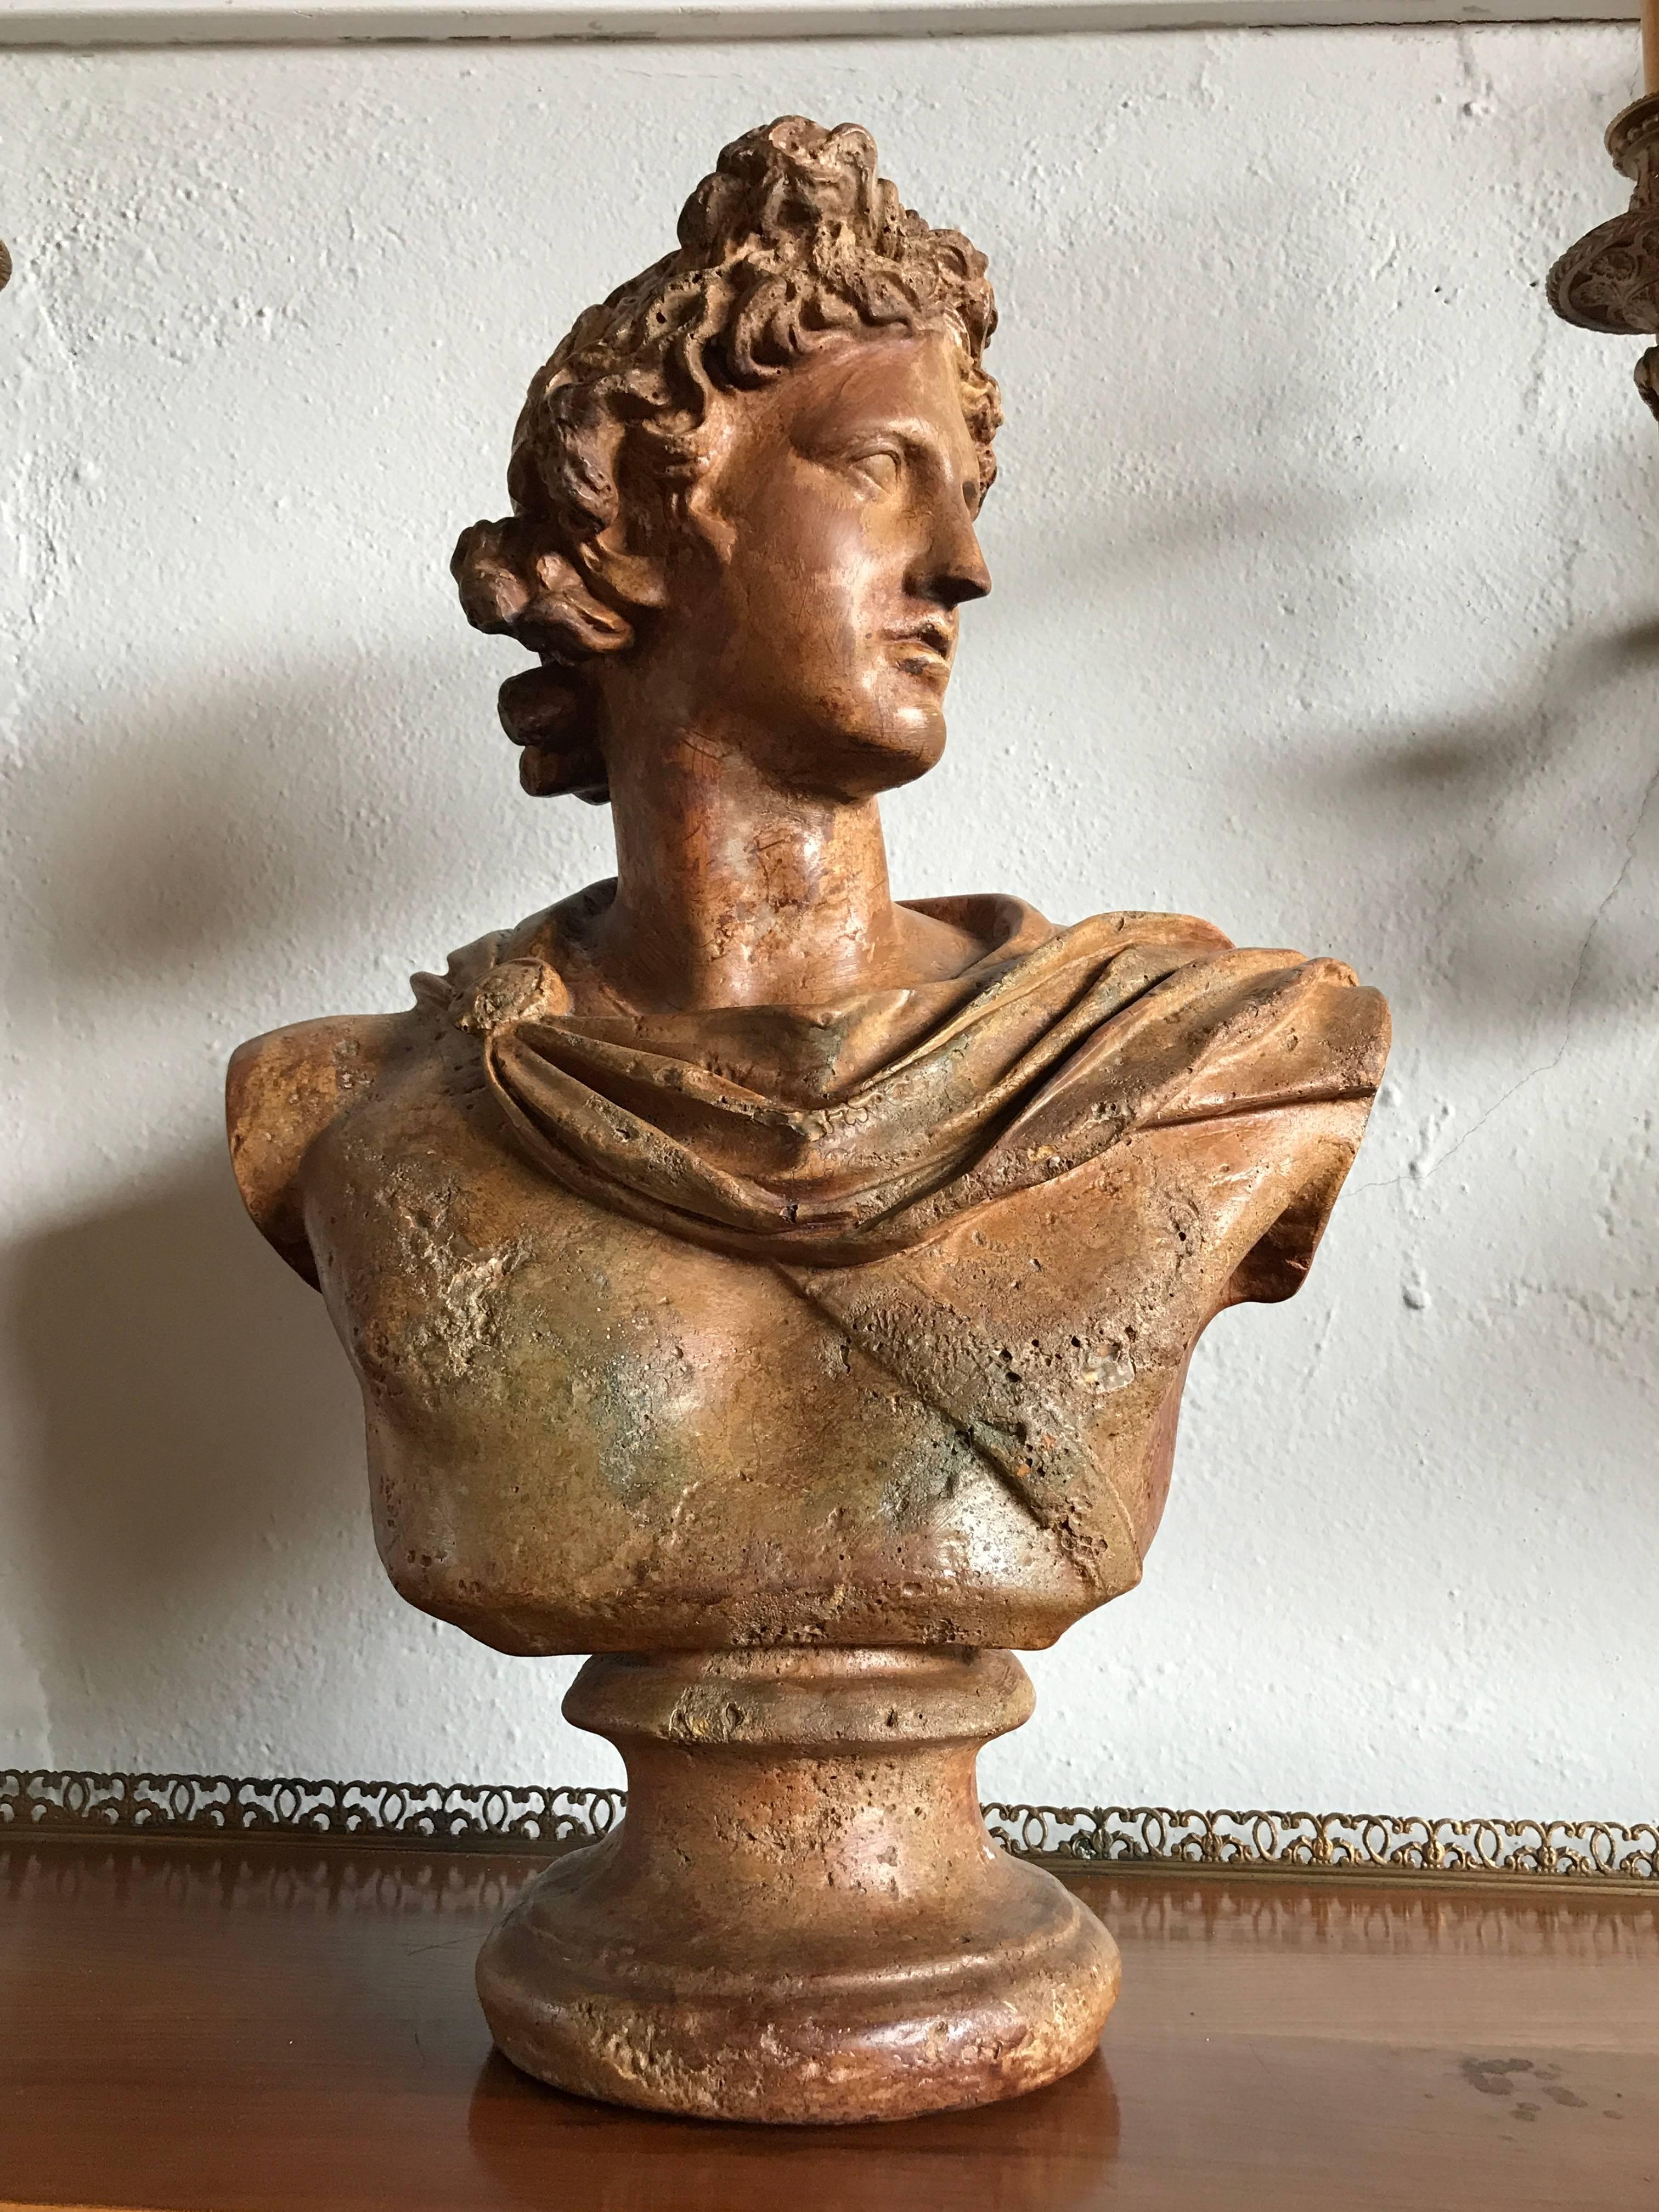 An antique bust of A Greek God. The weathered and worn bust having all the markings of fine antique sculpture. Wonderful detail and design.